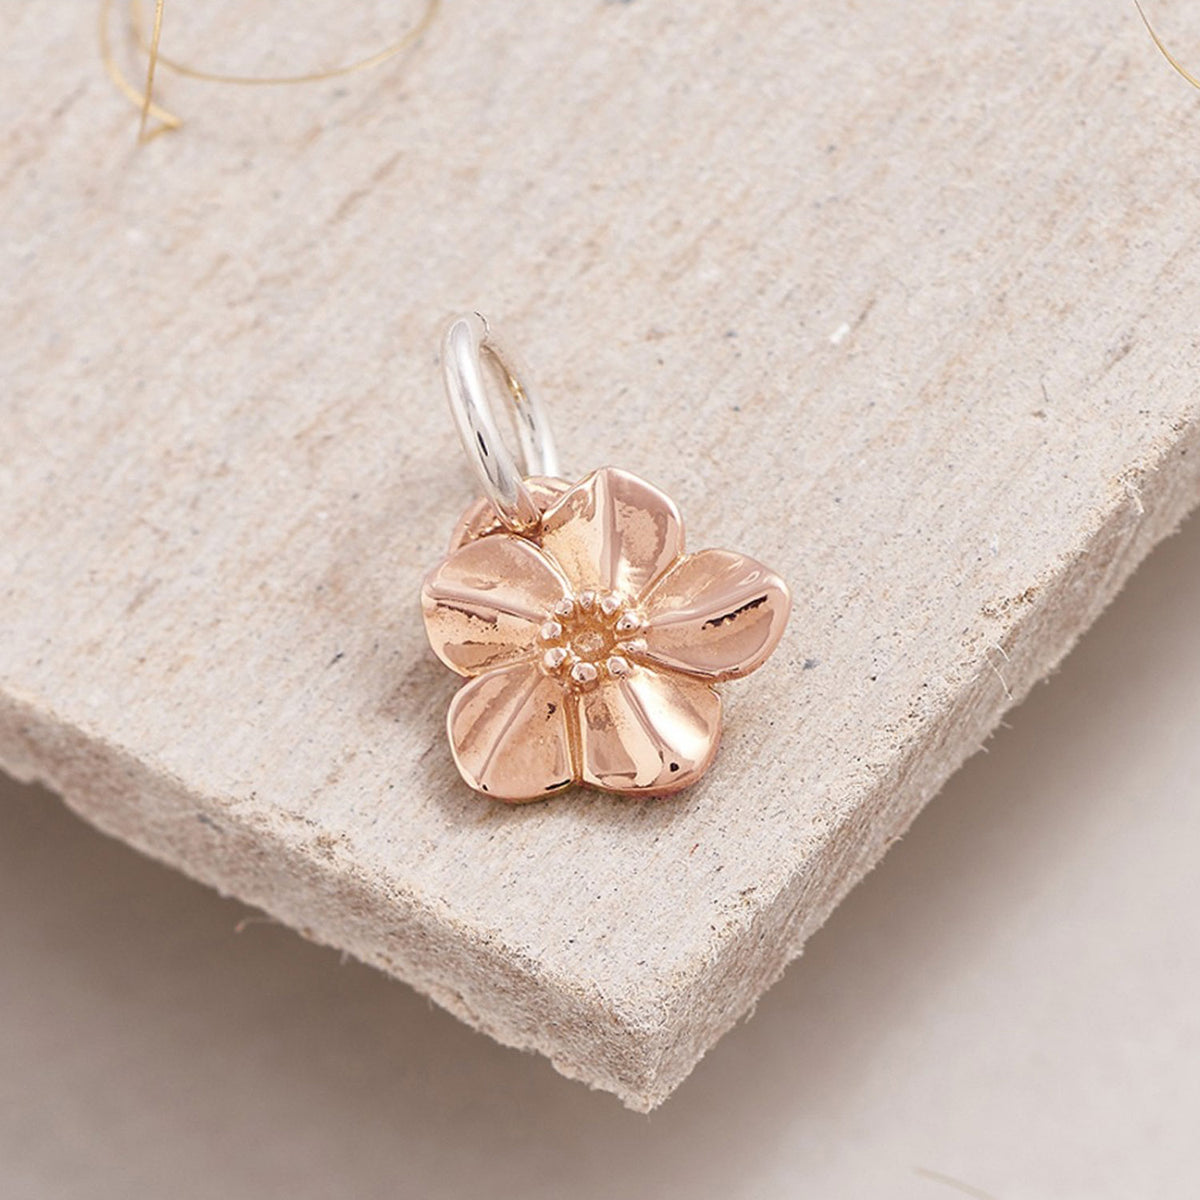 Forget-Me-Not Flower Charm in Solid 9ct Rose Gold